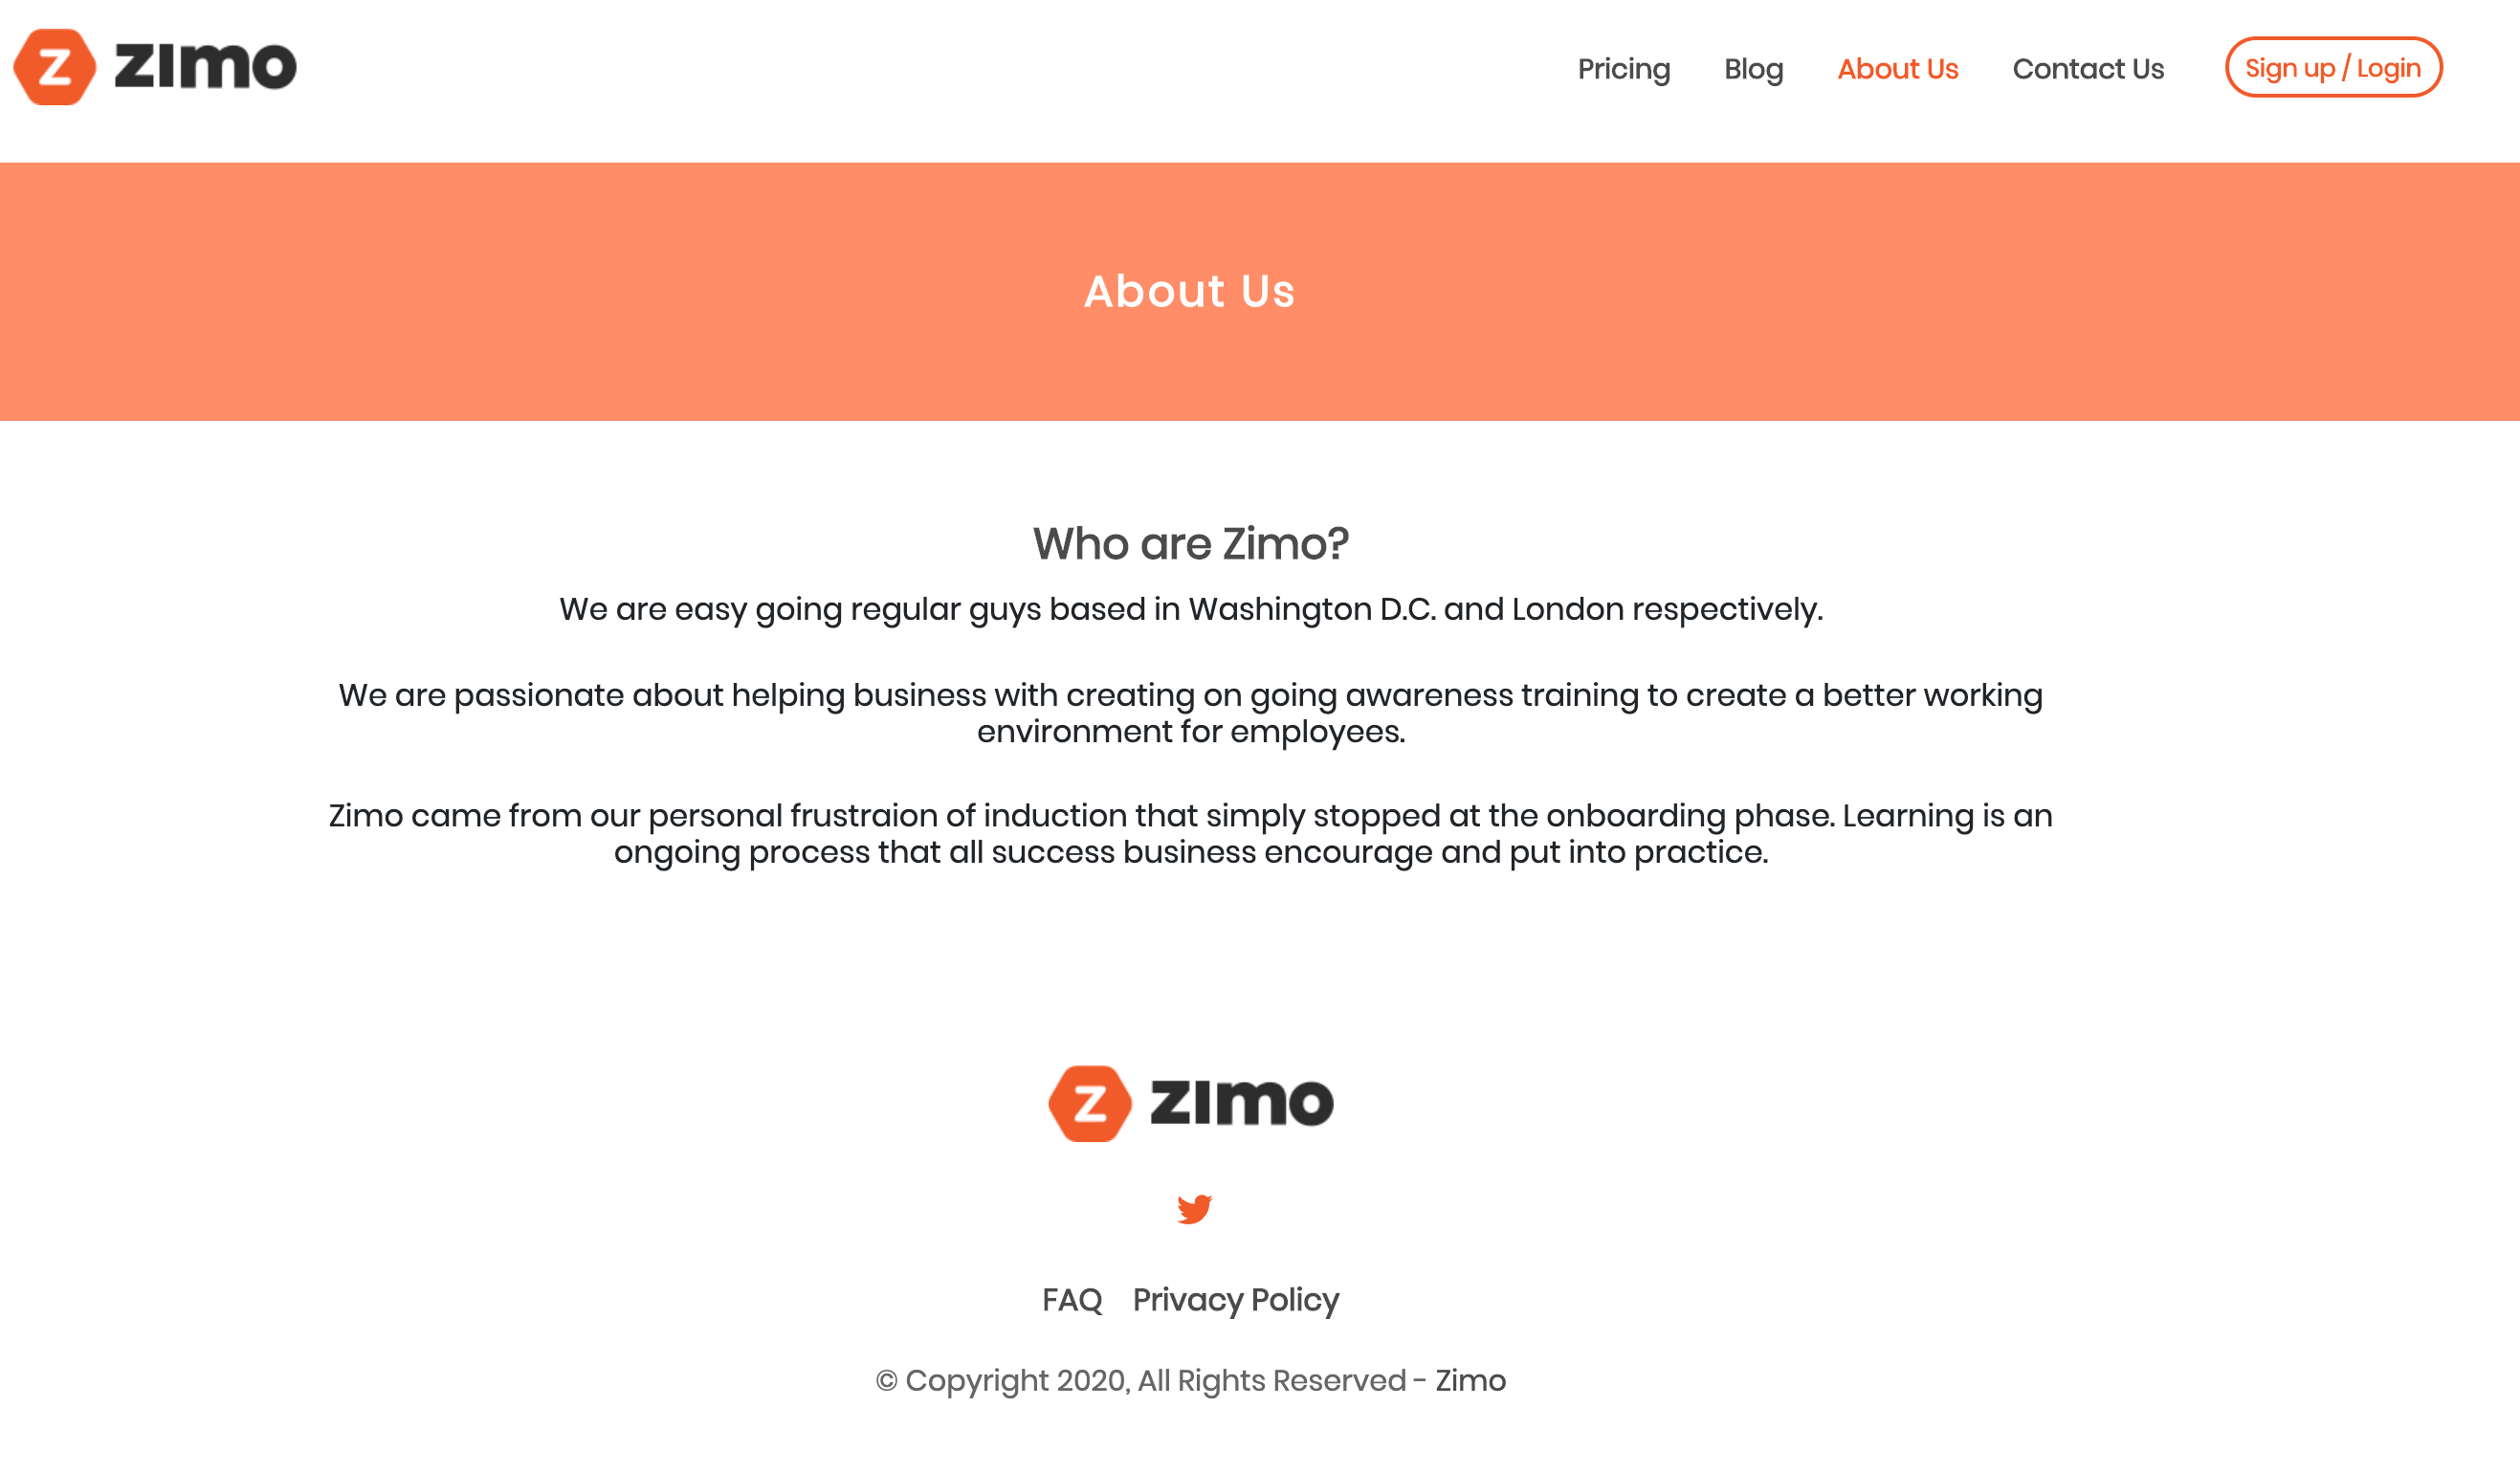 Know more about Zimo